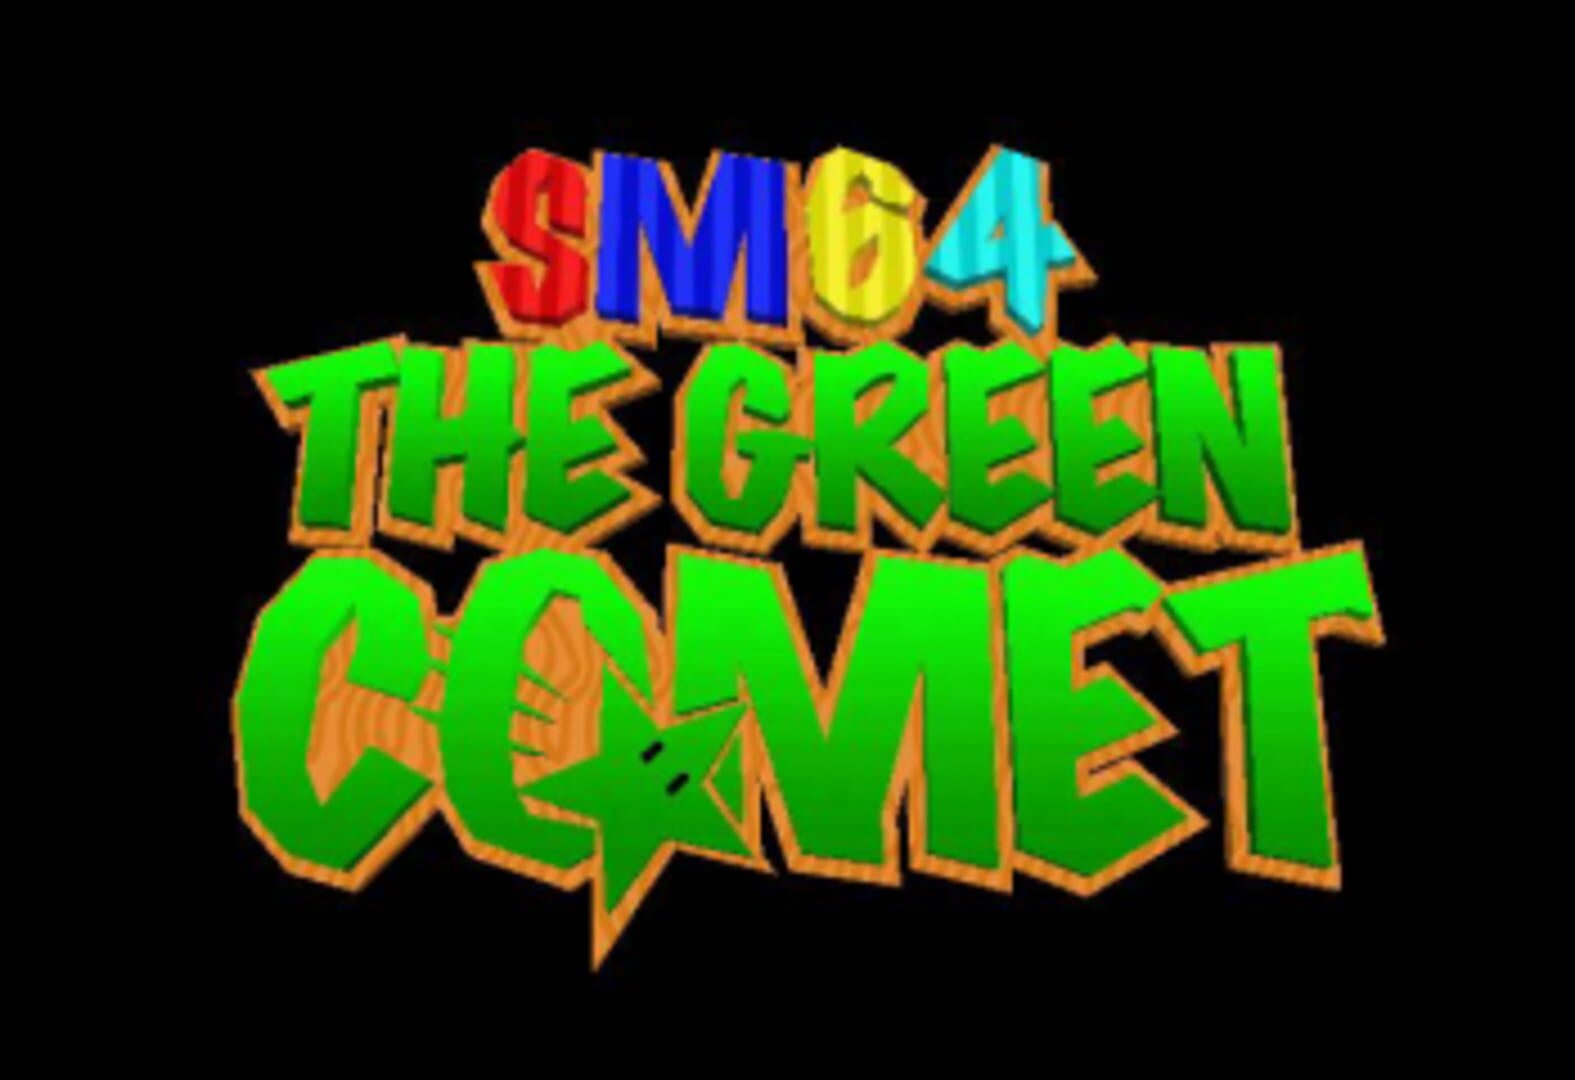 SM64: The Green Comet featured image